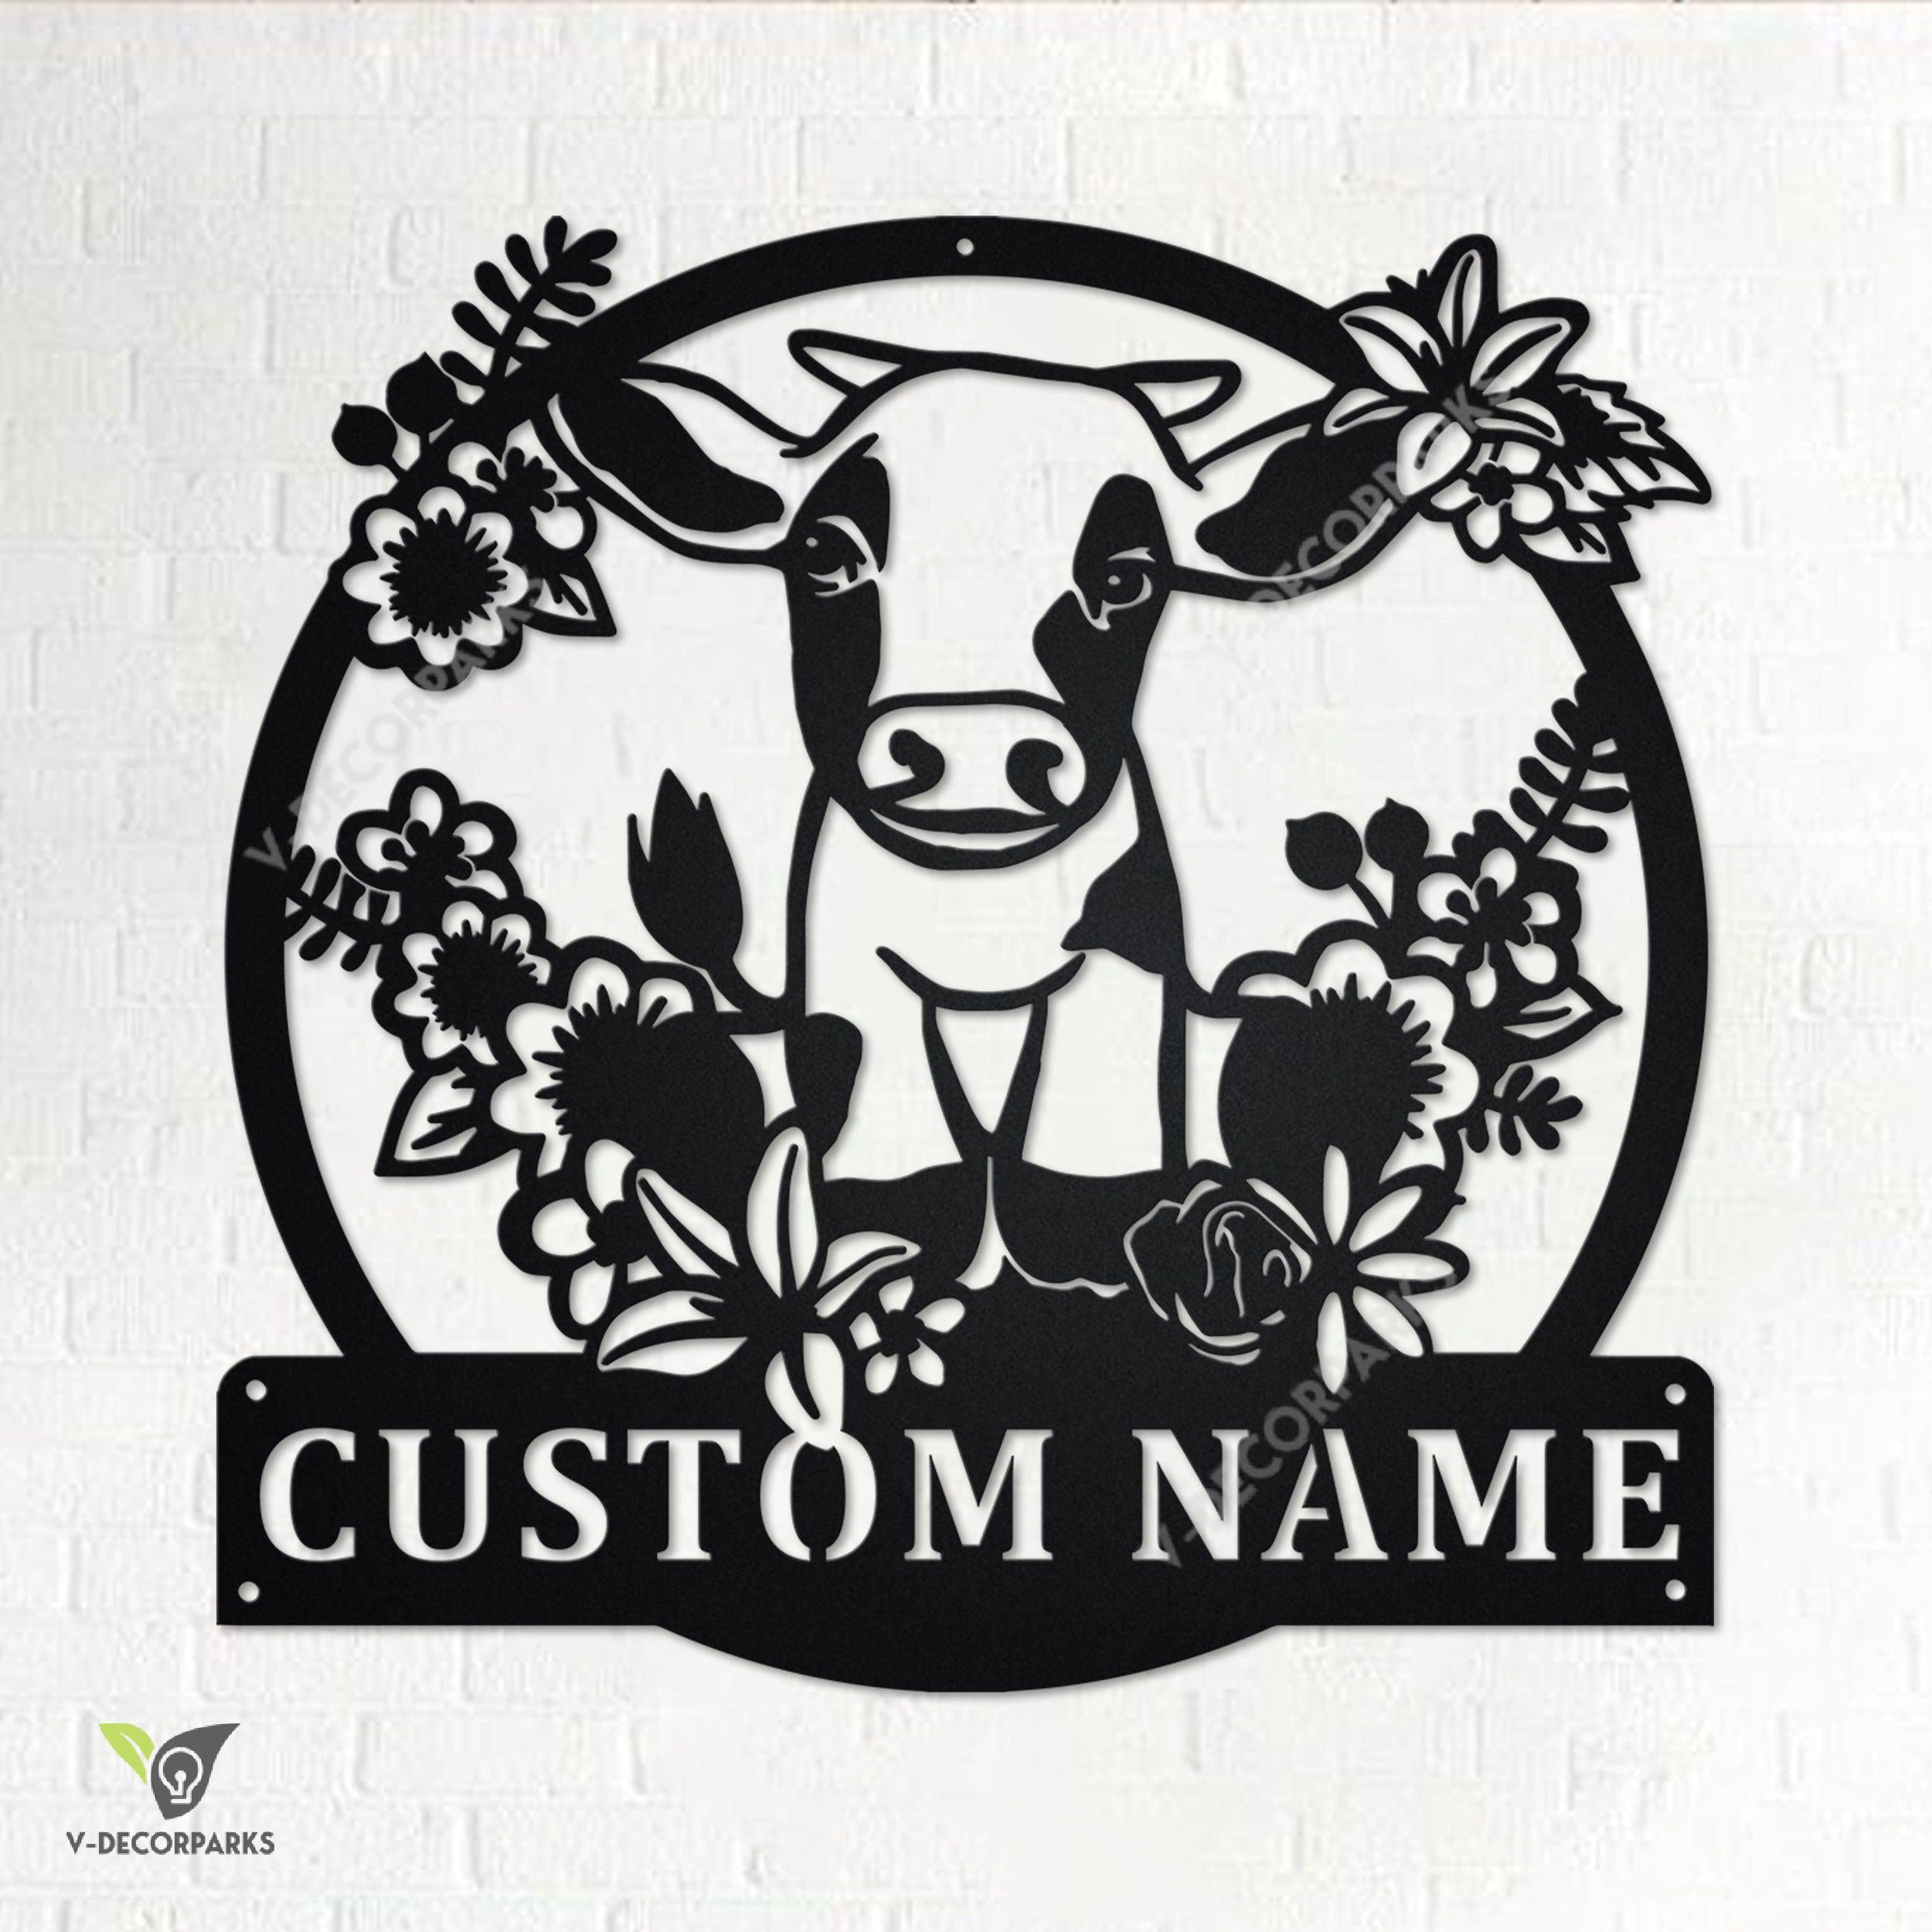 Custom Floral Cow Farm Metal Wall Art, Personalized Cow Farm Name Sign Decoration For Room, Cow Farm Metal Home Decor, Custom Floral Cow